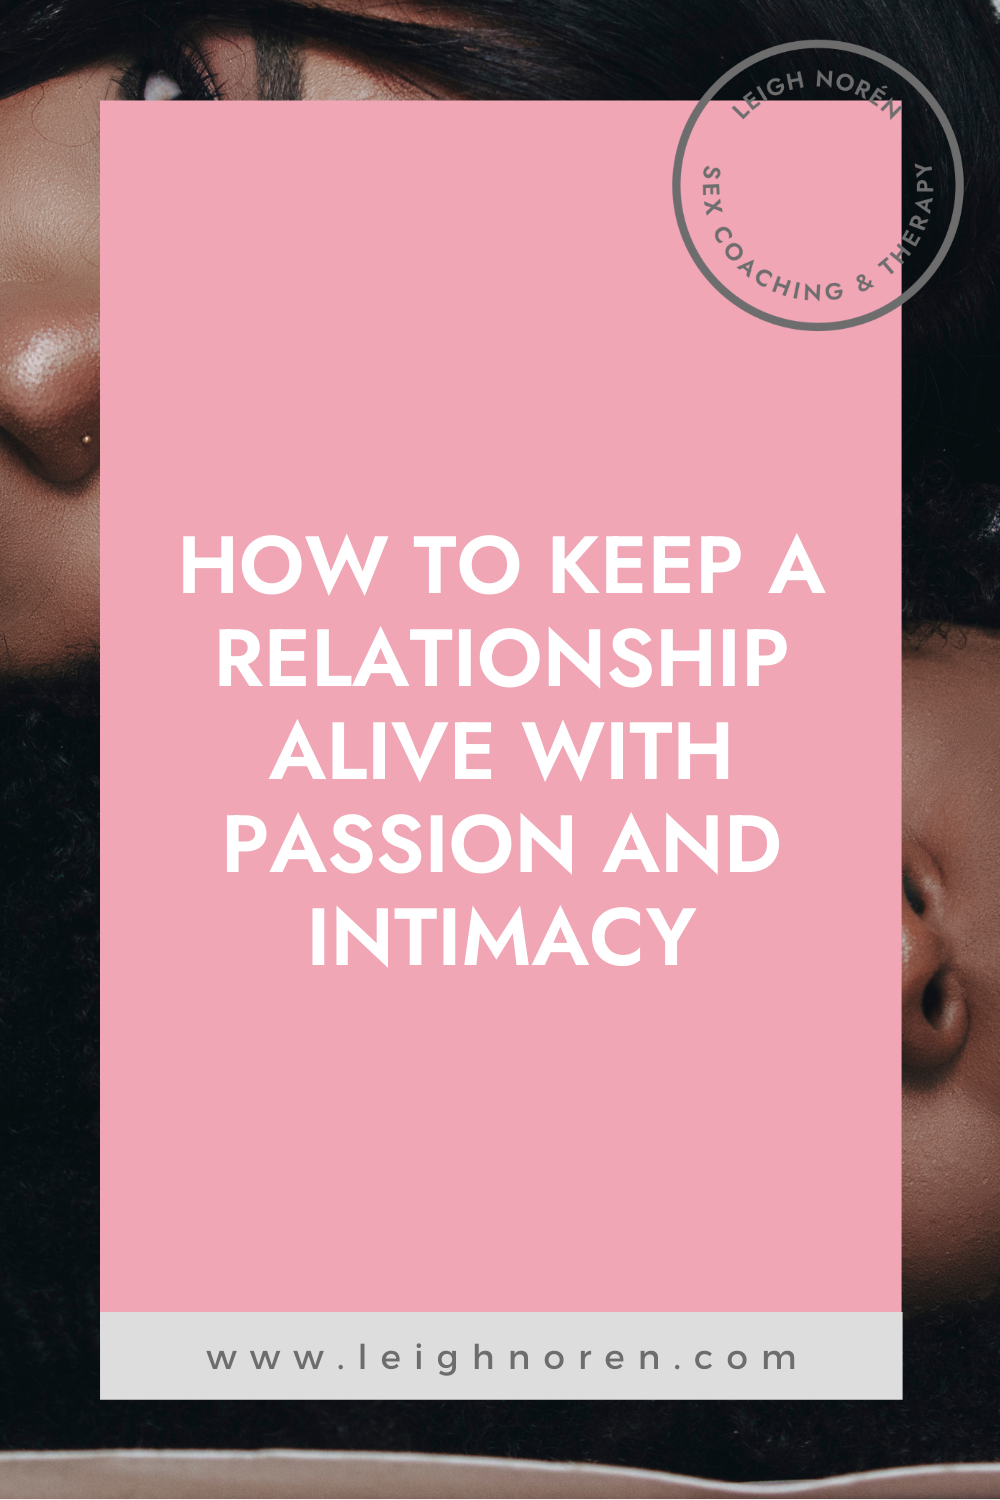 How To Keep A Relationship Alive With Passion And Intimacy